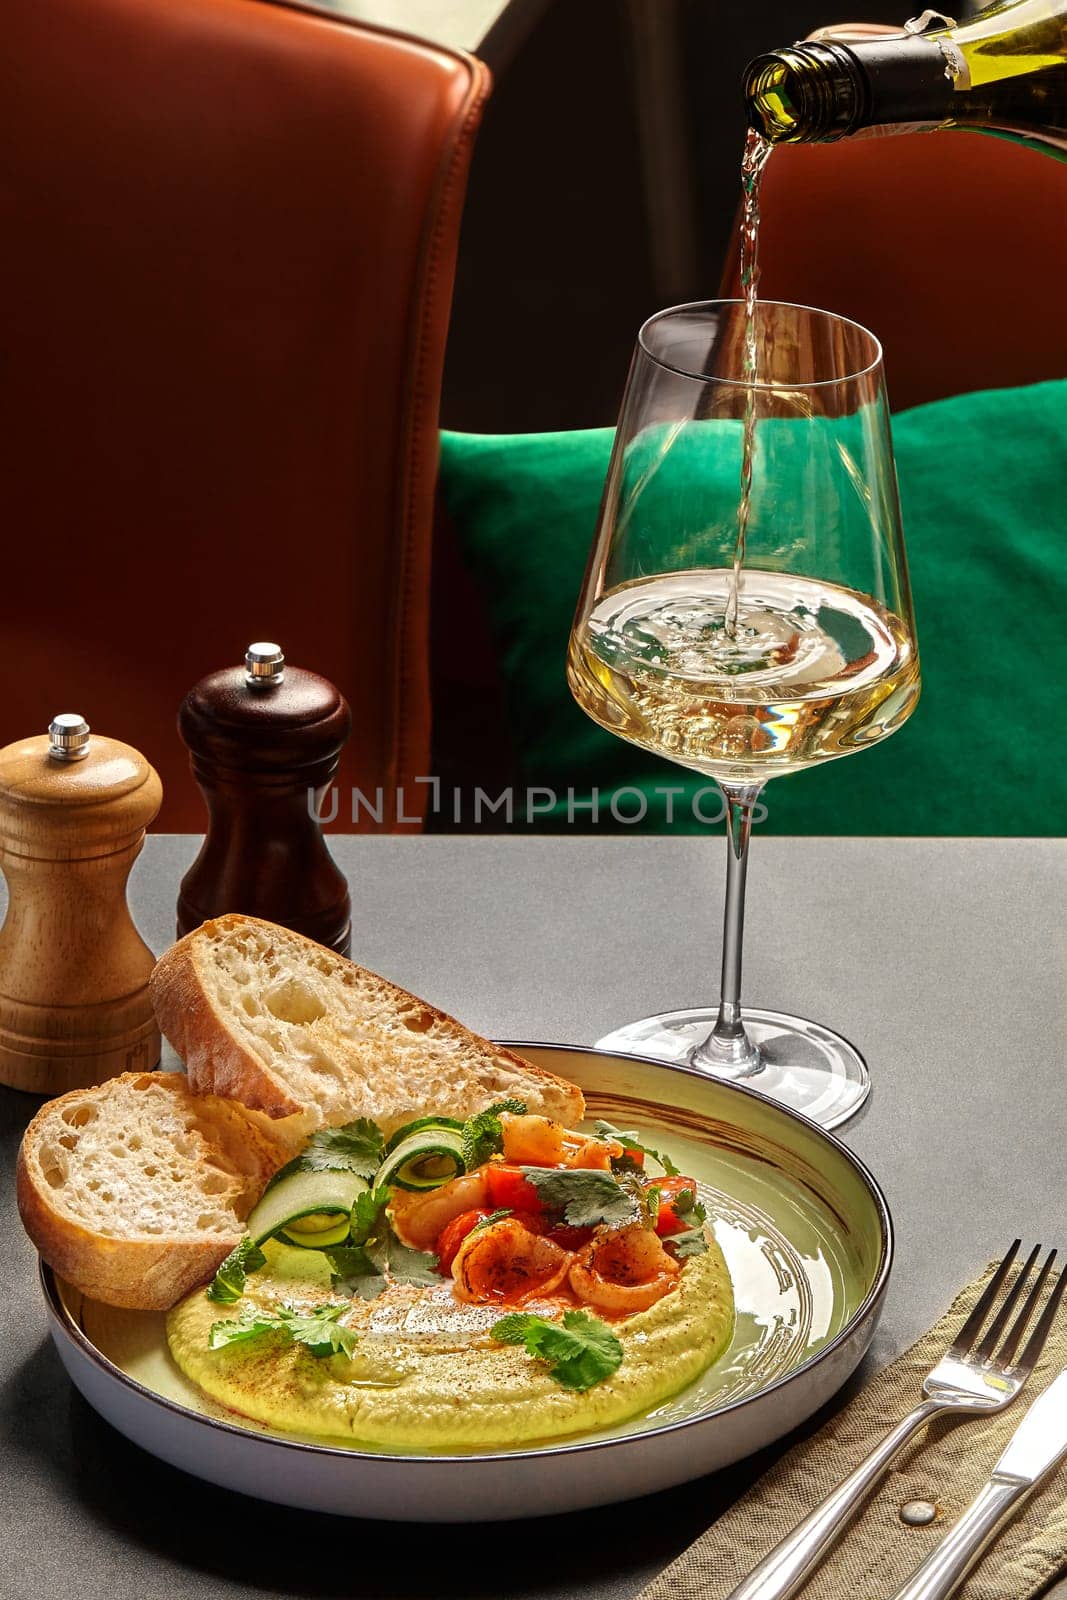 Elegant dinning setting with plate of creamy hummus complemented perfectly with white wine, served with succulent fried shrimps, fresh cucumber slices, greens and crispy toasts